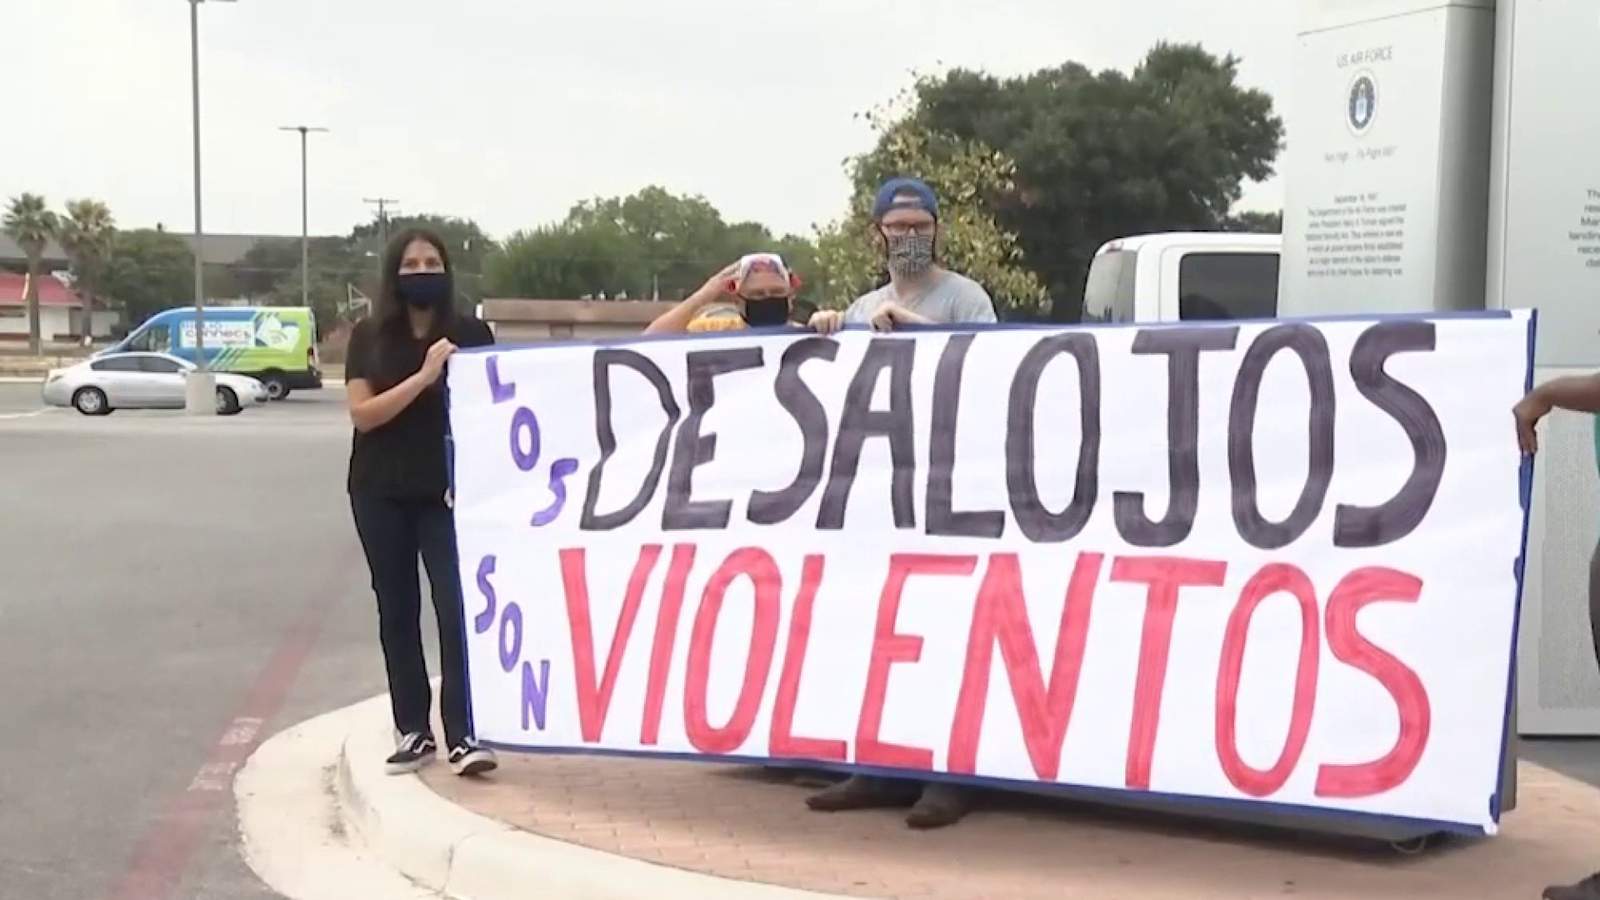 San Antonio activists demand evictions end, say police should not remove people from homes